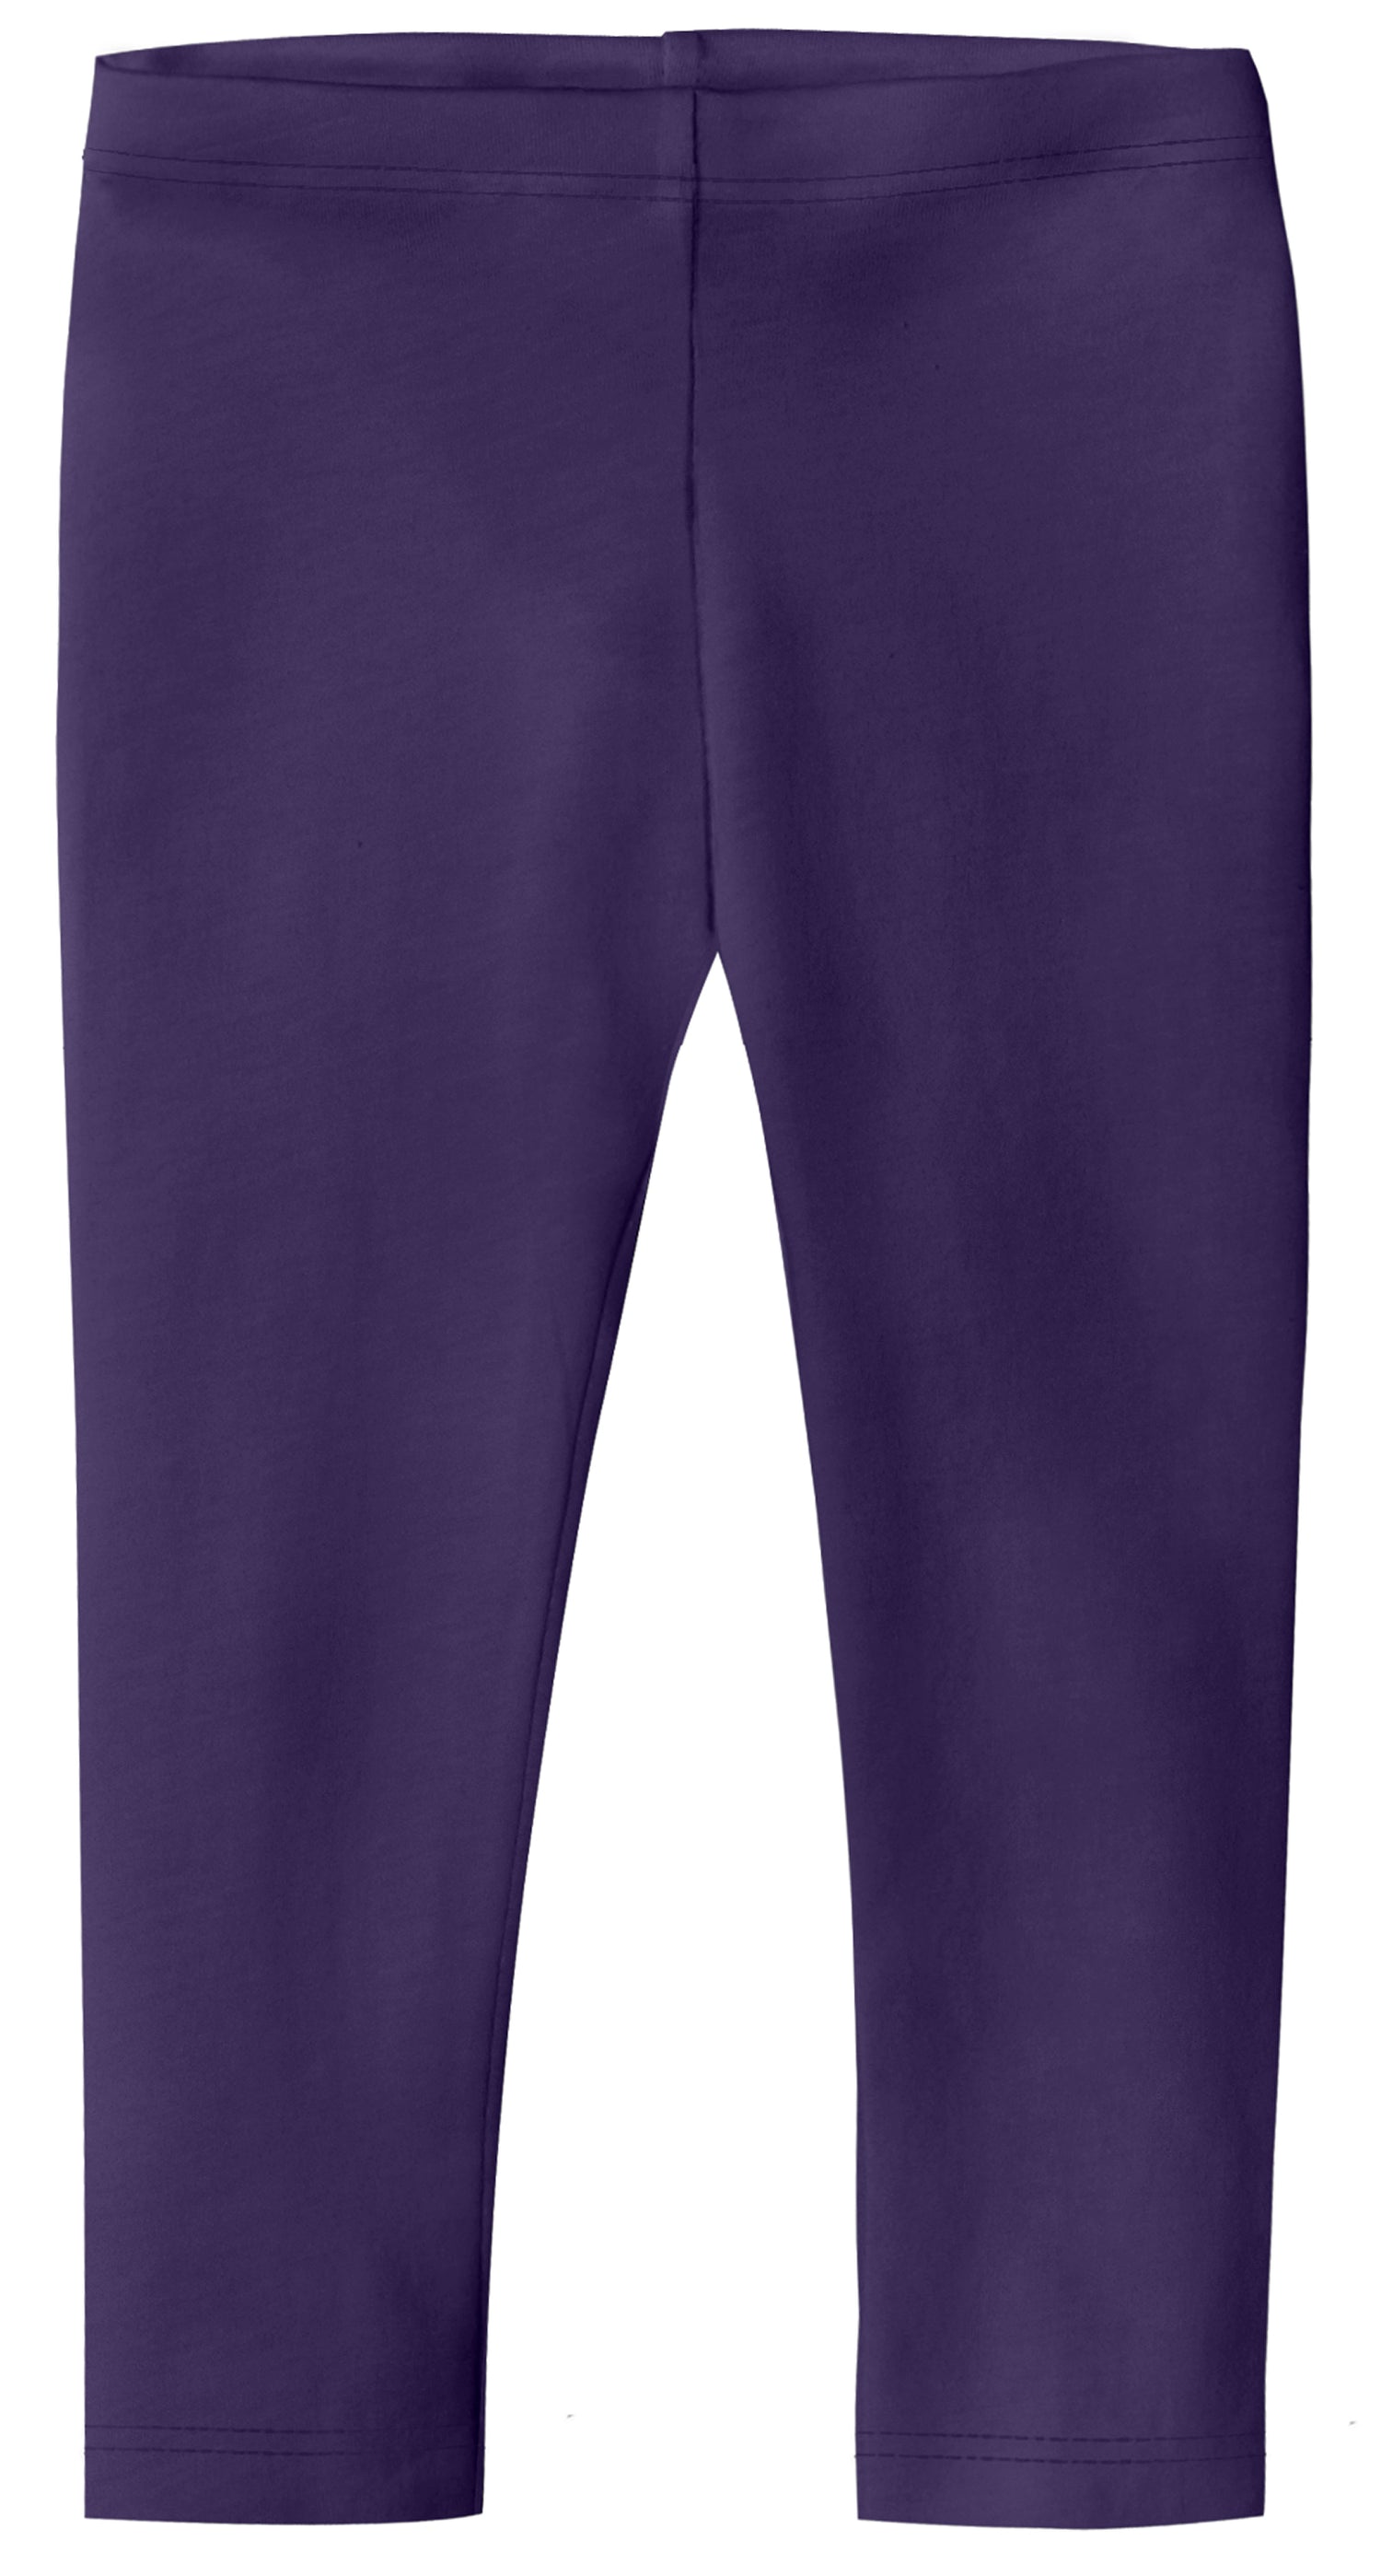 Lavender Colored Knit Capri Leggings made for 18 American Girl Doll  Clothes